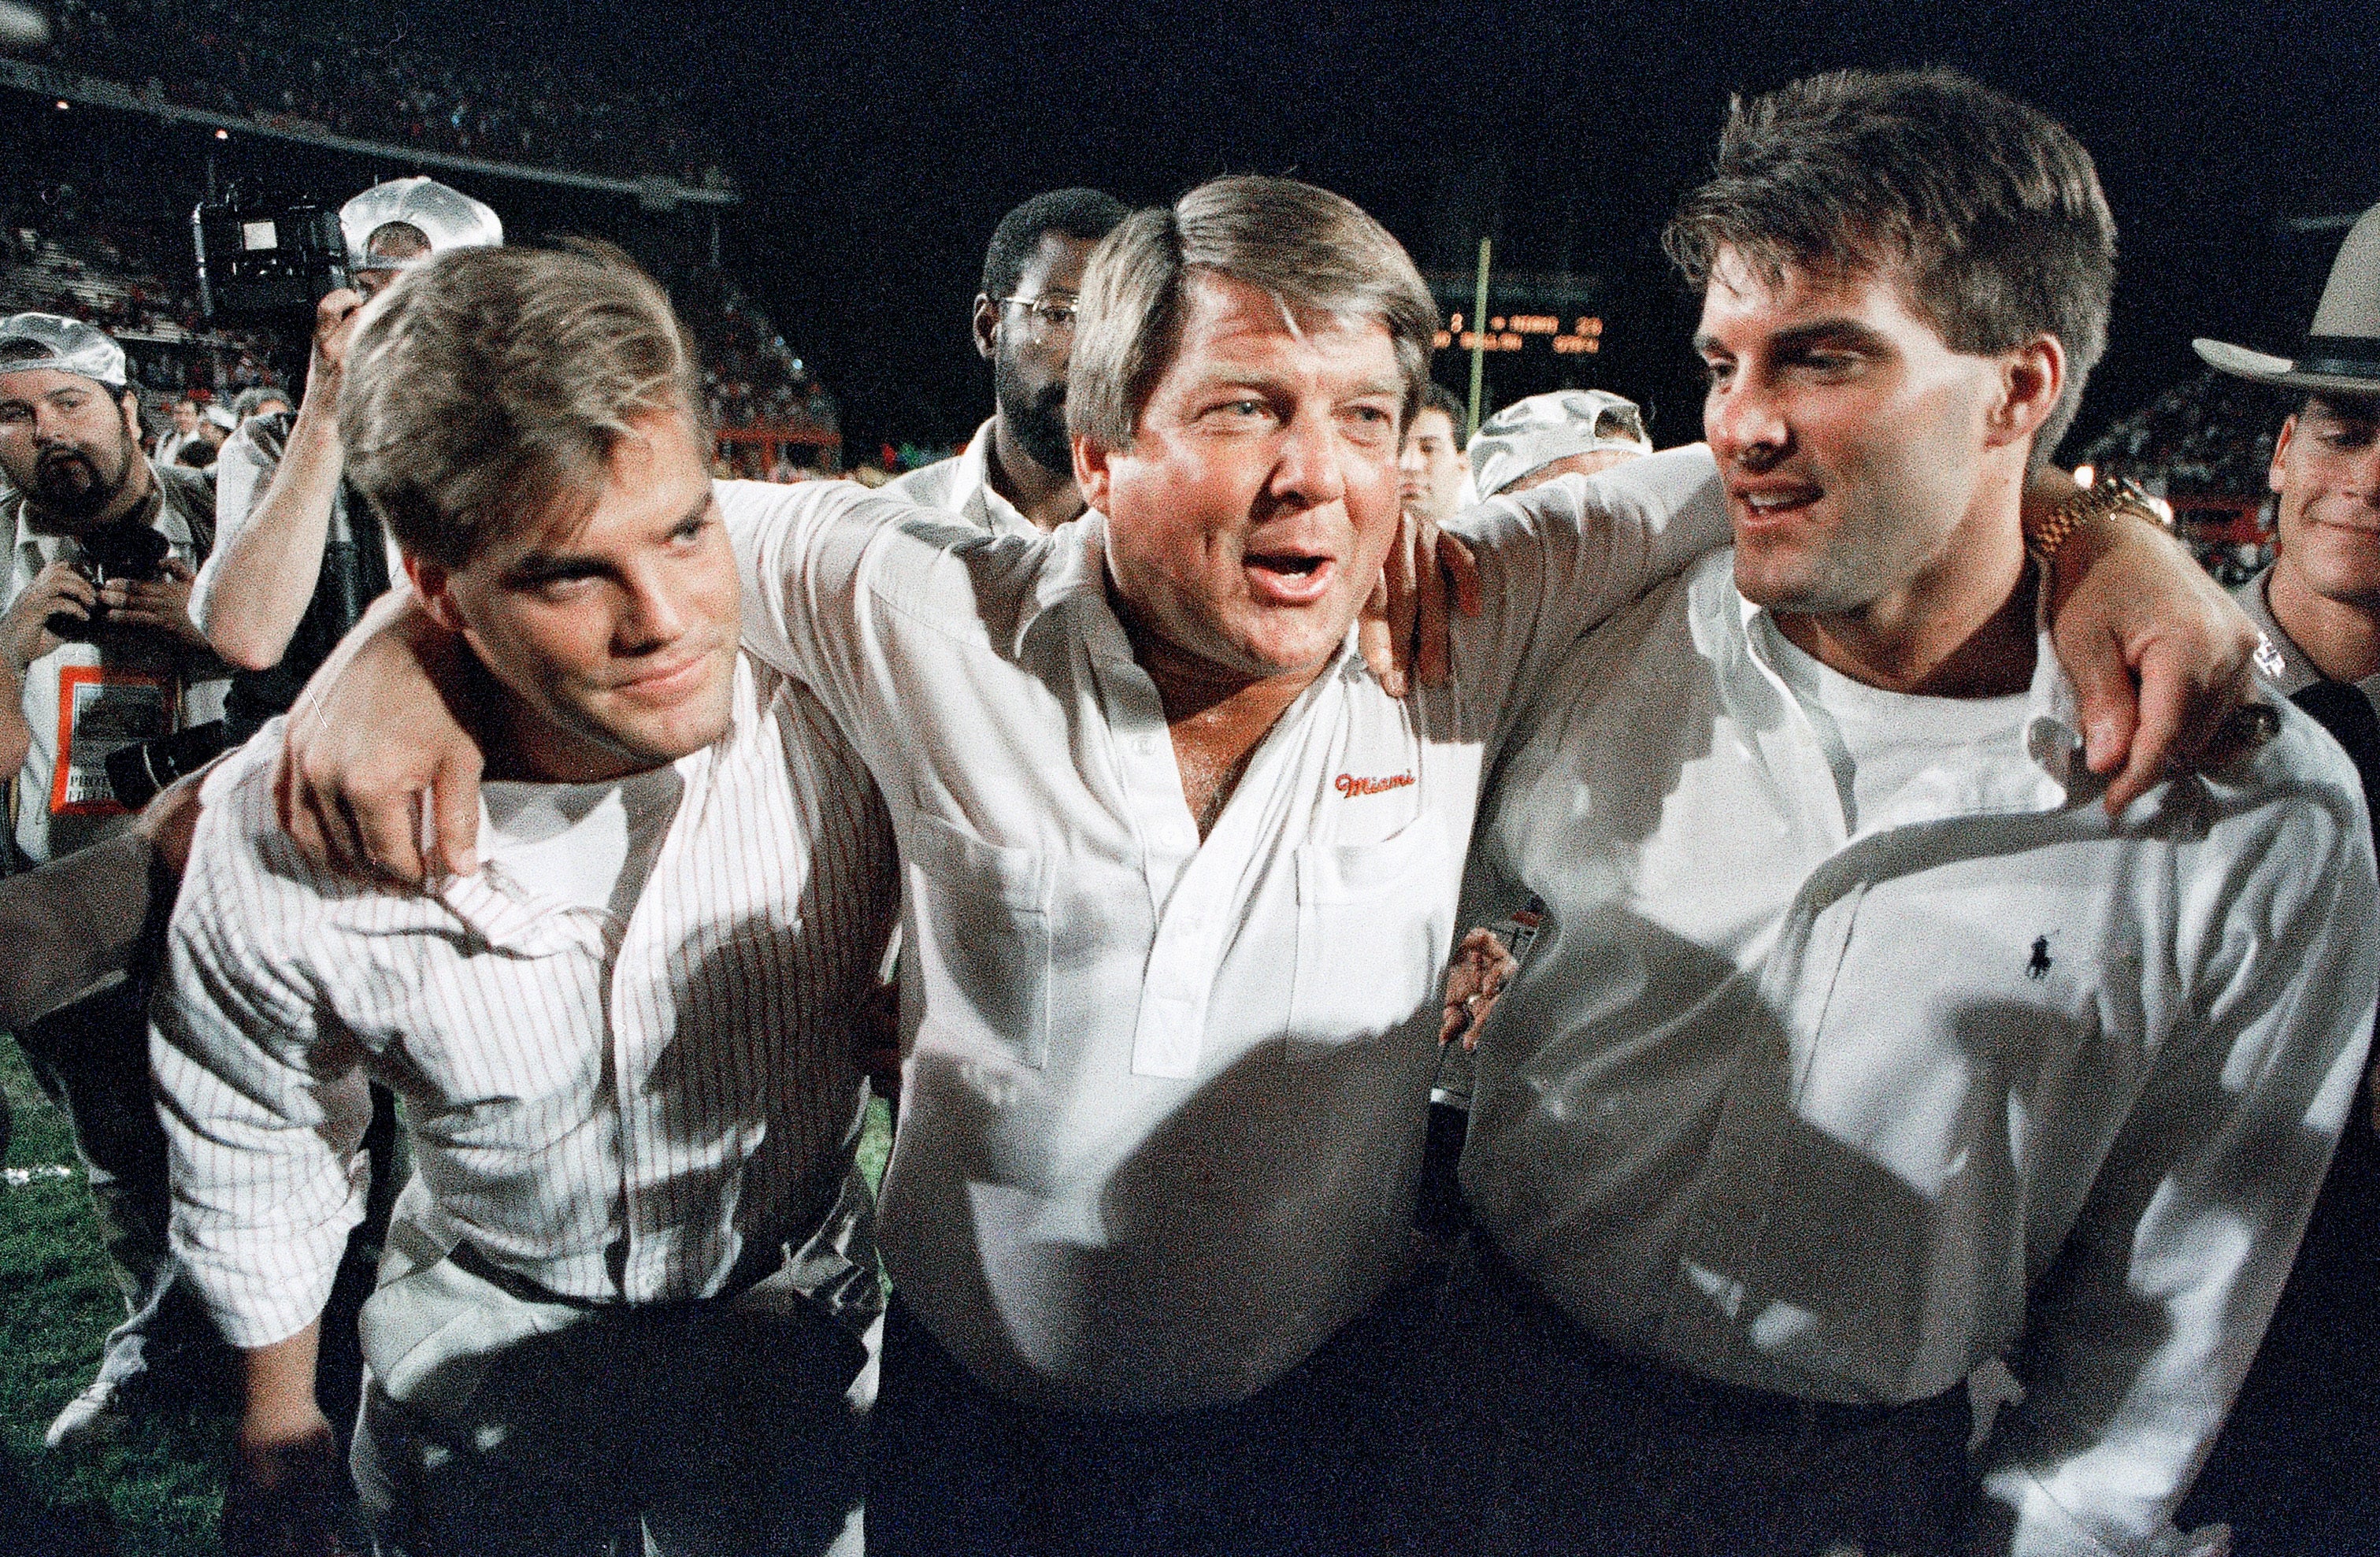 Hall of Fame coach Jimmy Johnson reflects on his career